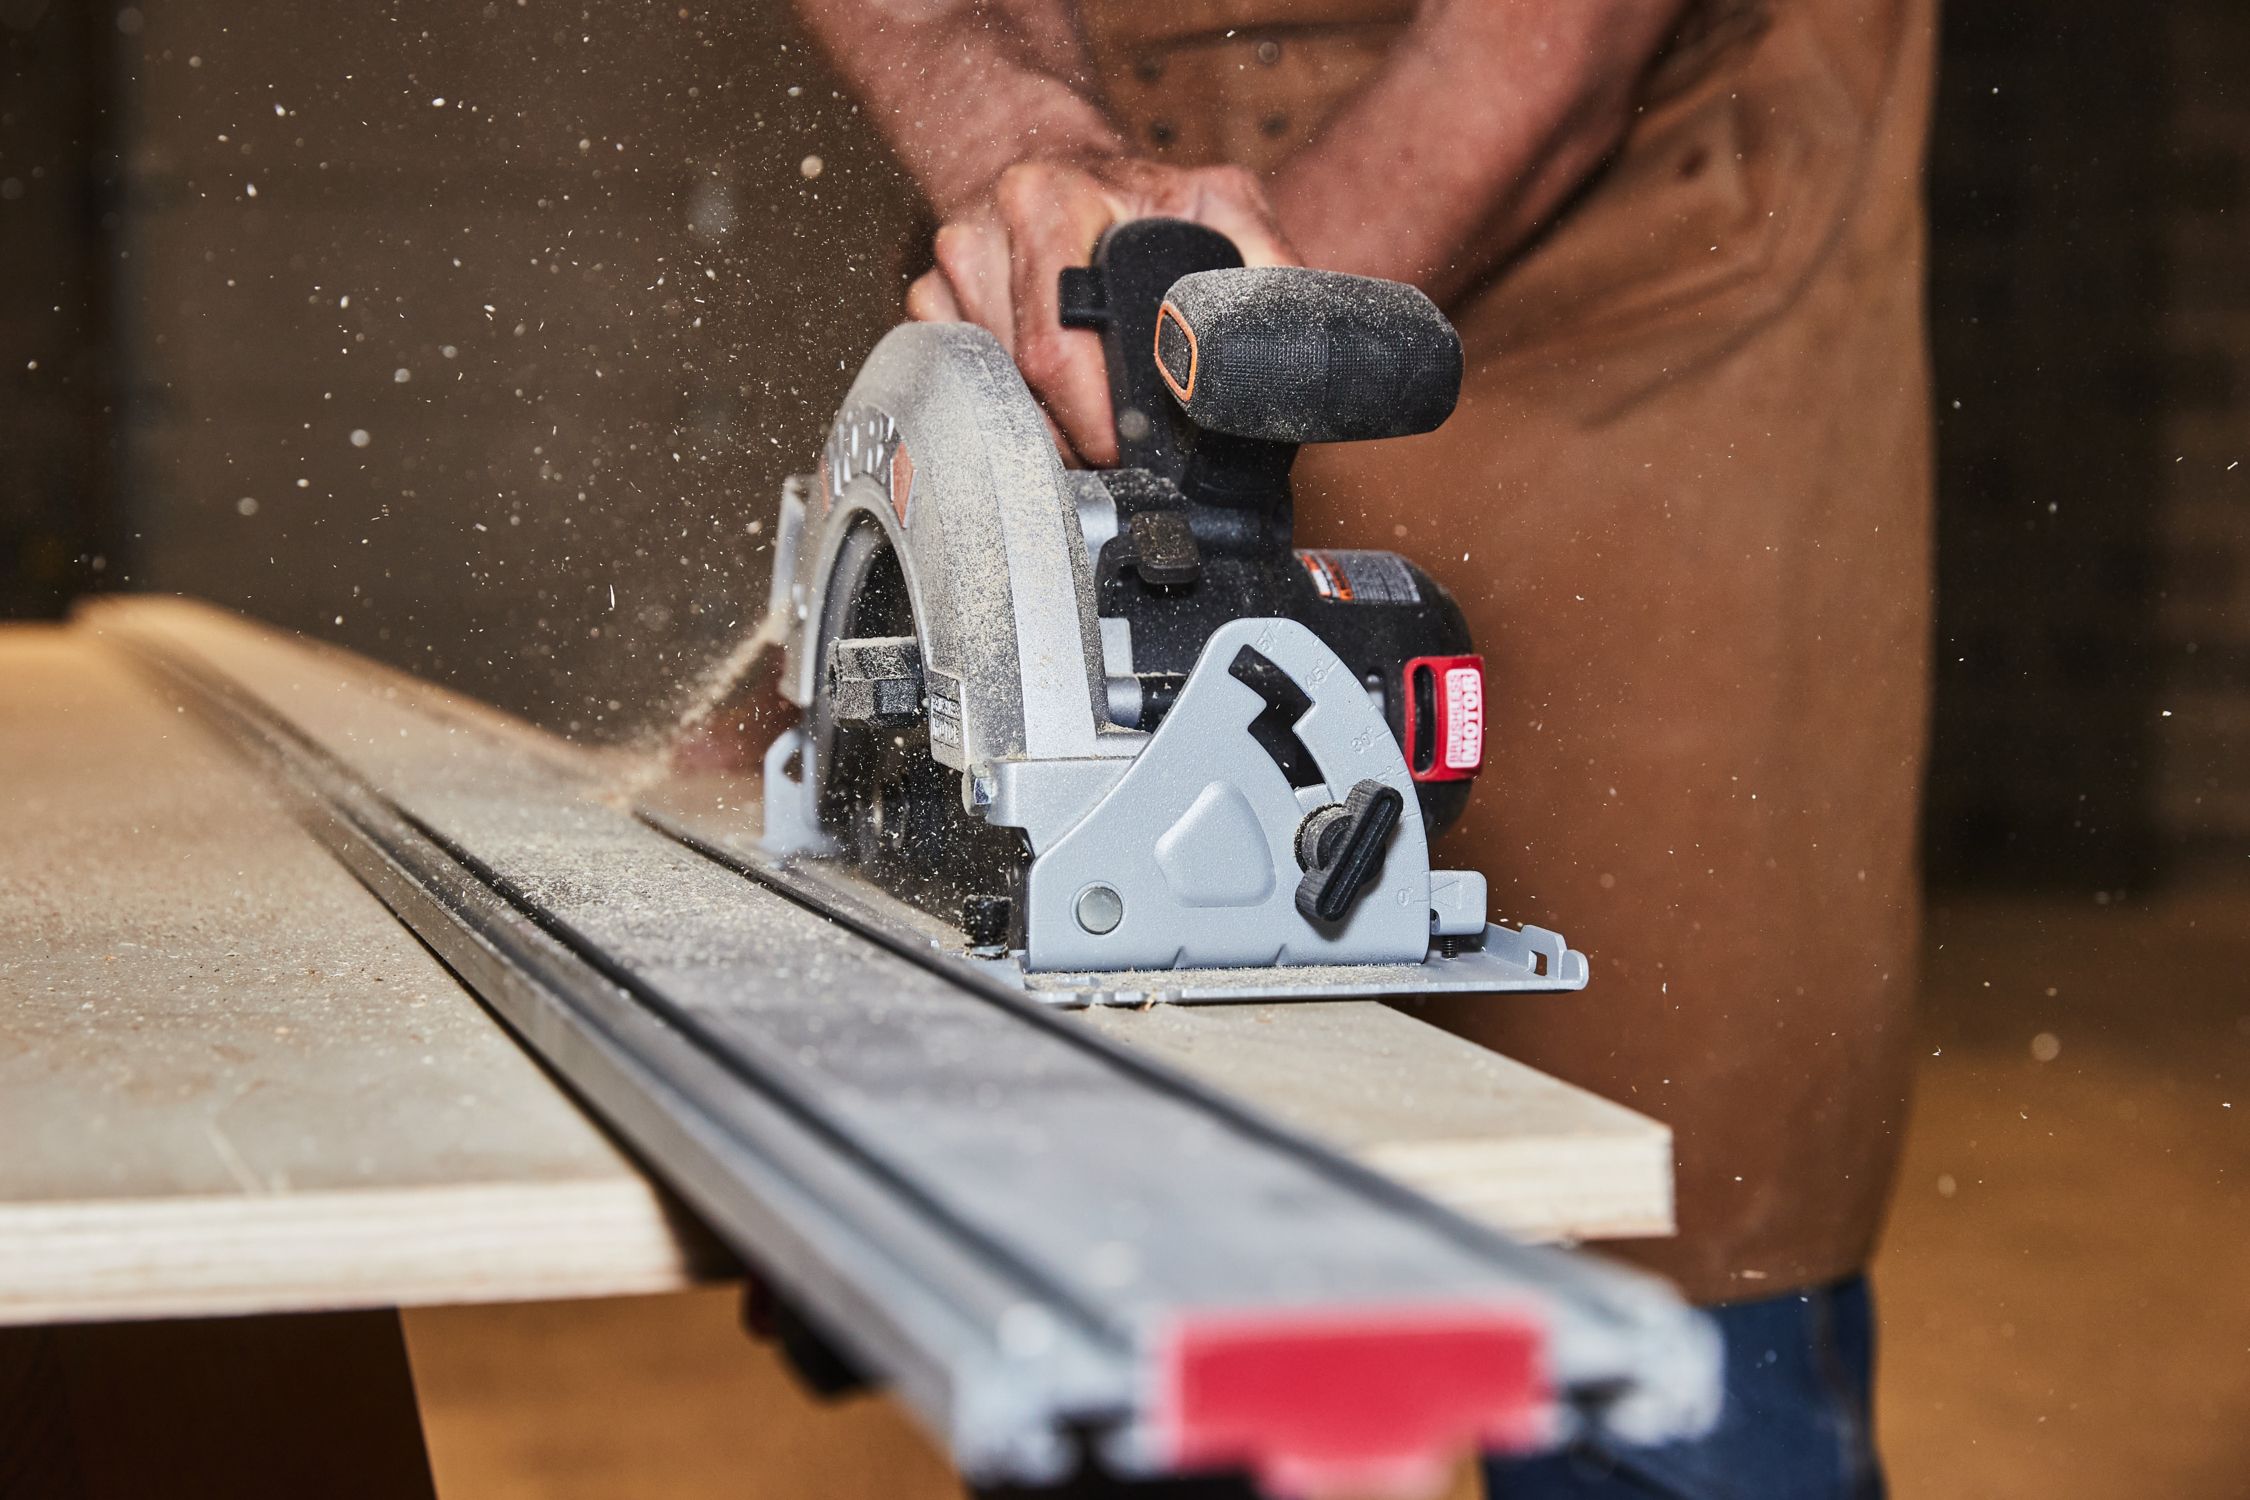 How to Accurately Cut With a Circular Saw